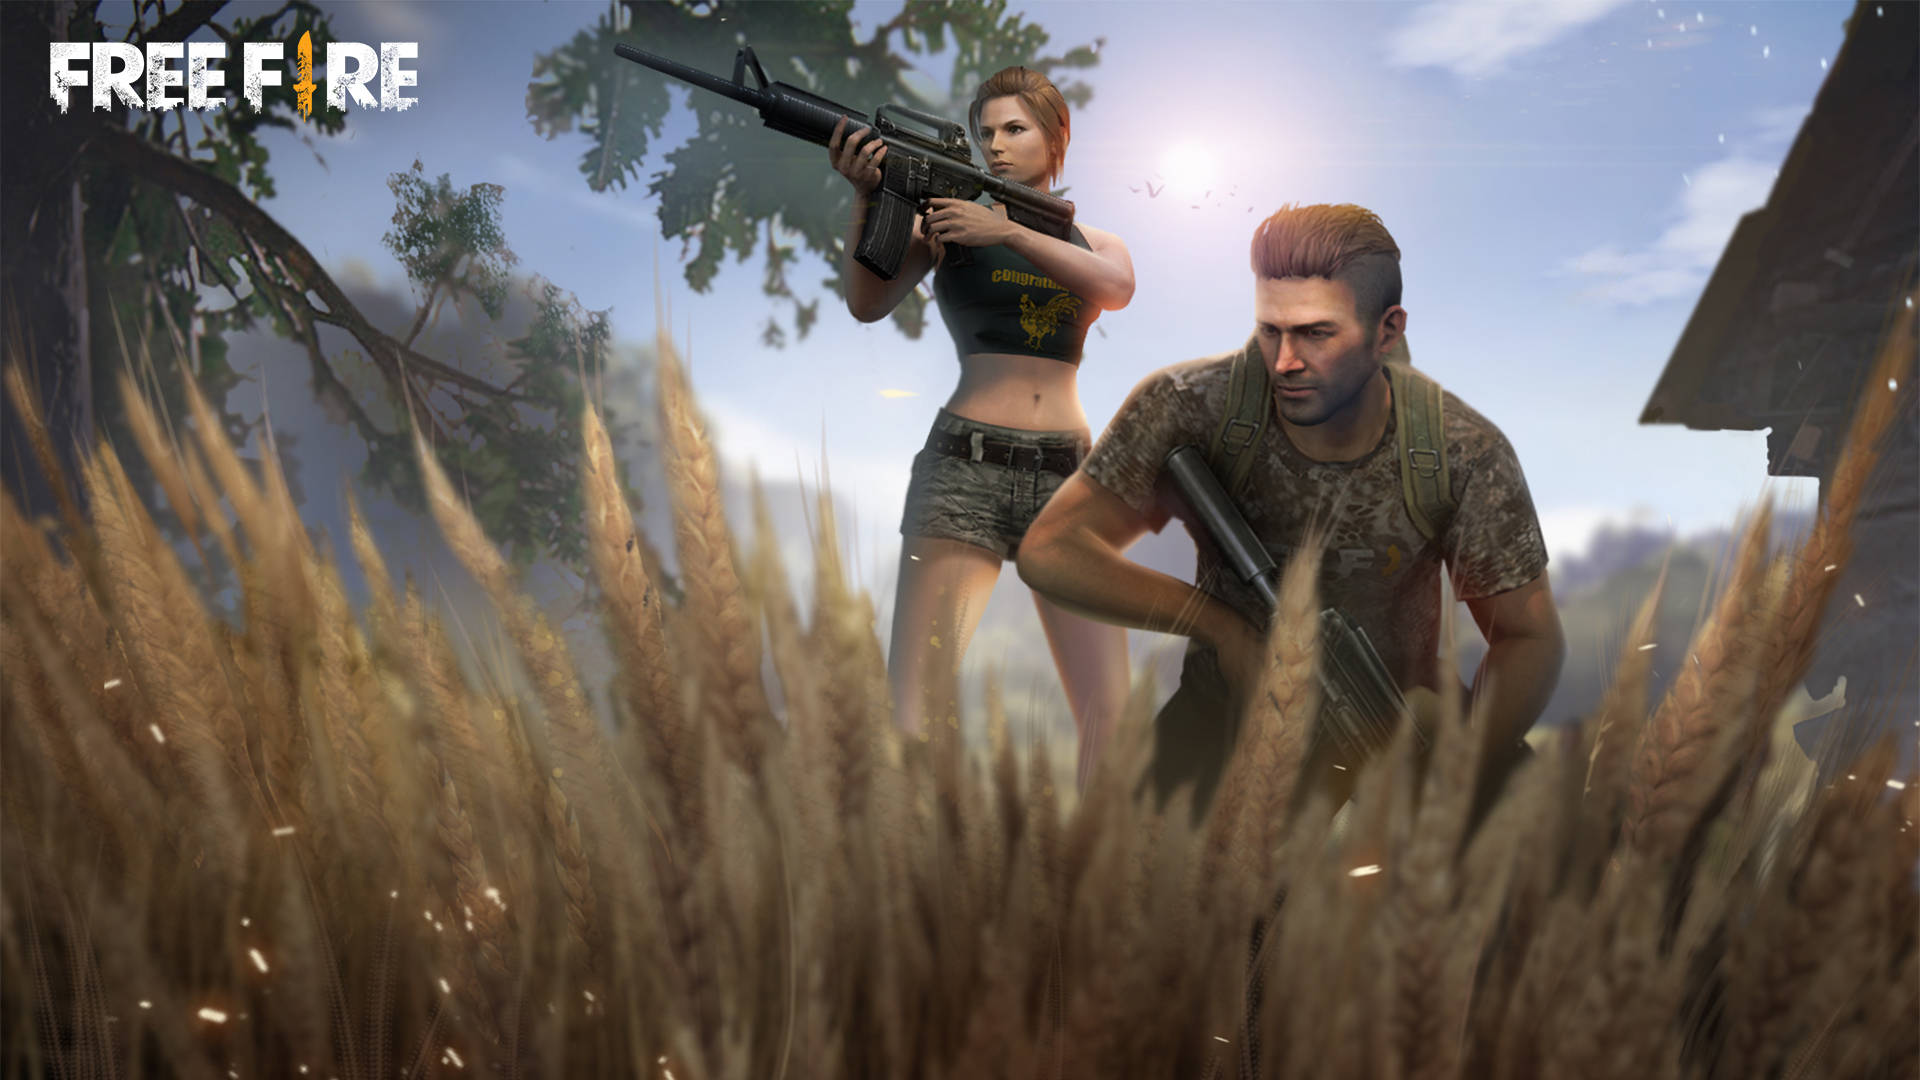 Adam And Eve Free Fire 2020 Background